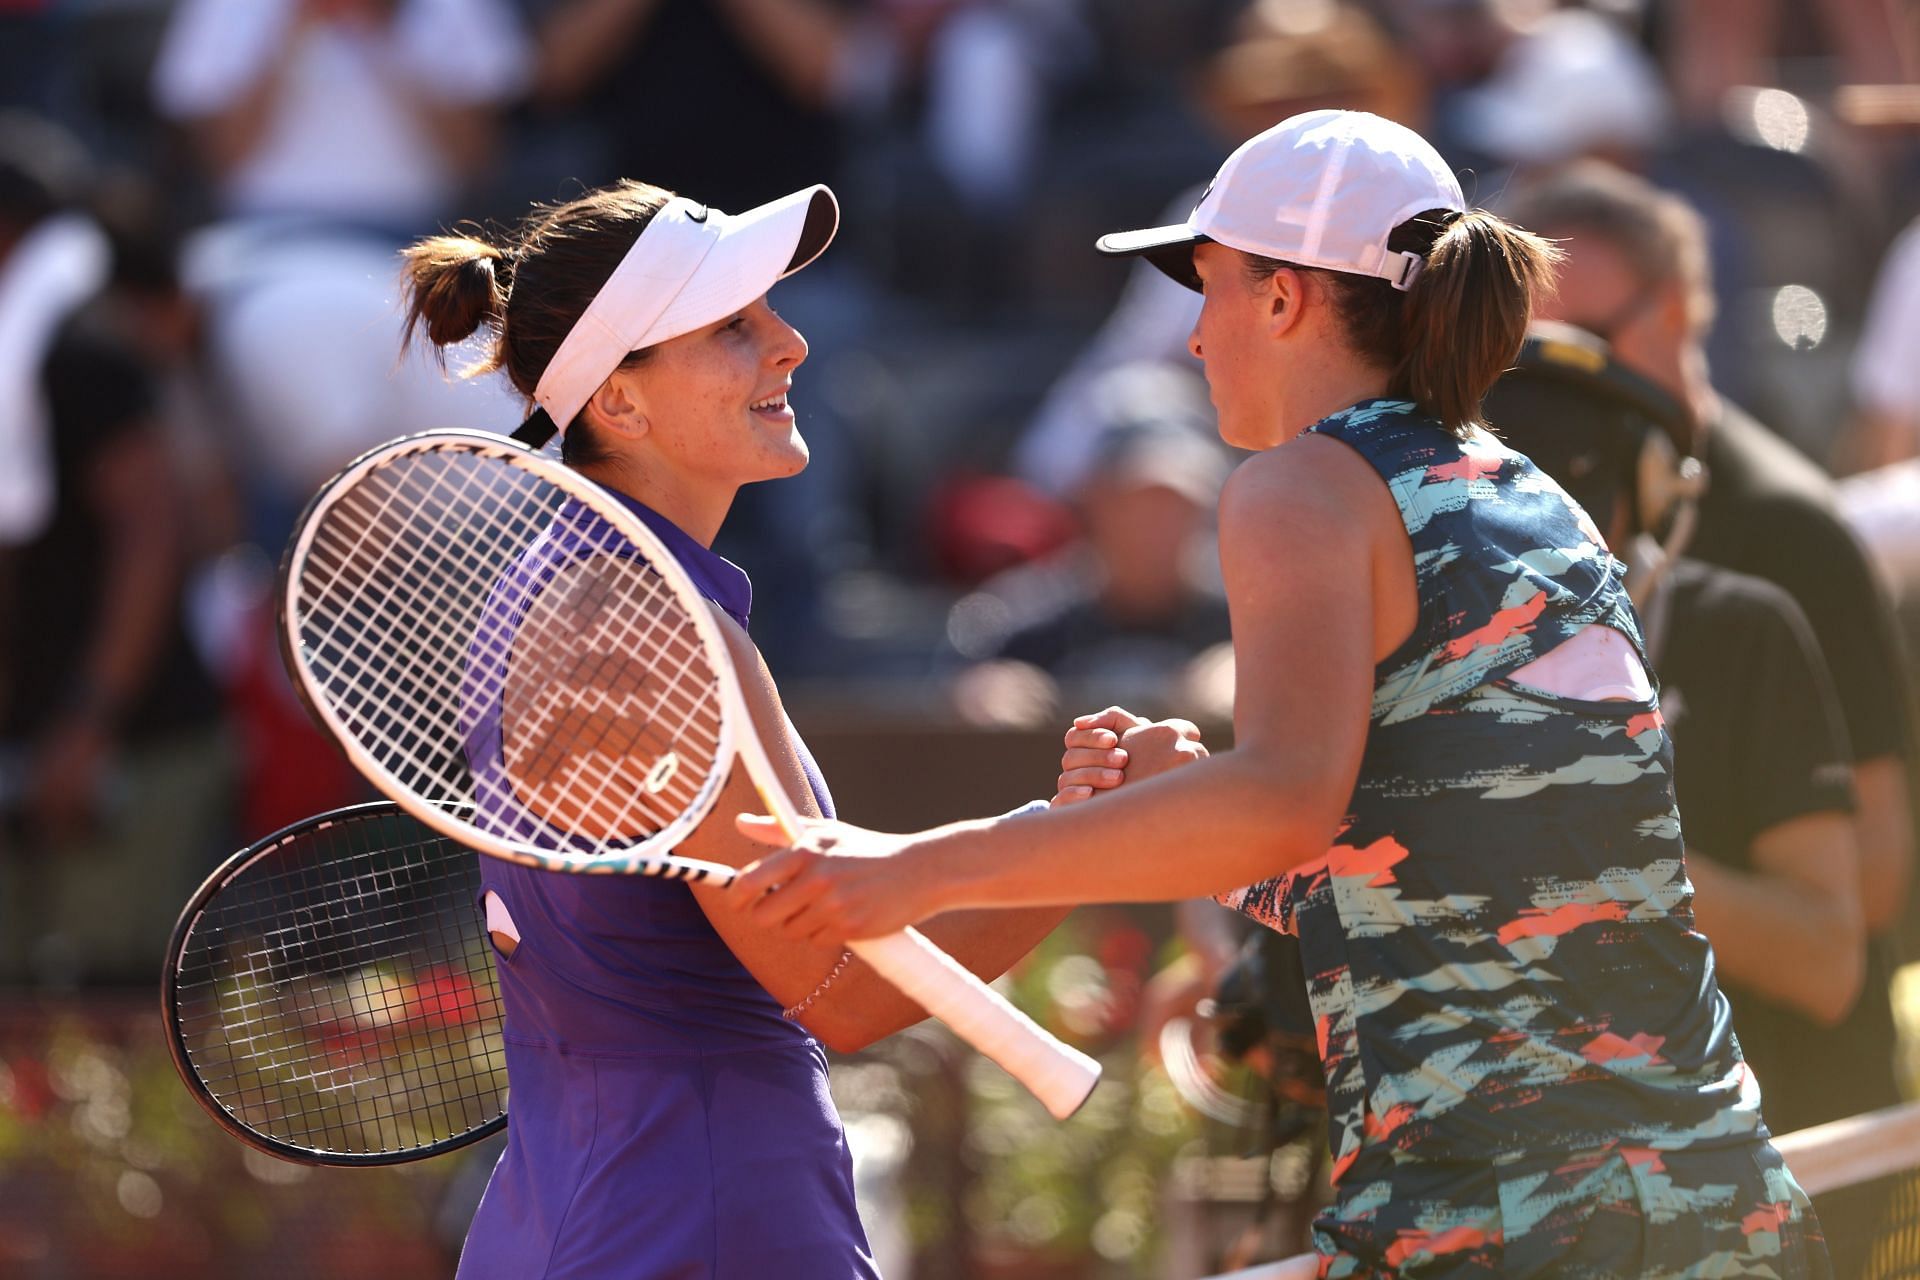 Iga Swiatek and Bianca Andreescu after their match at the 2022 Italian Open